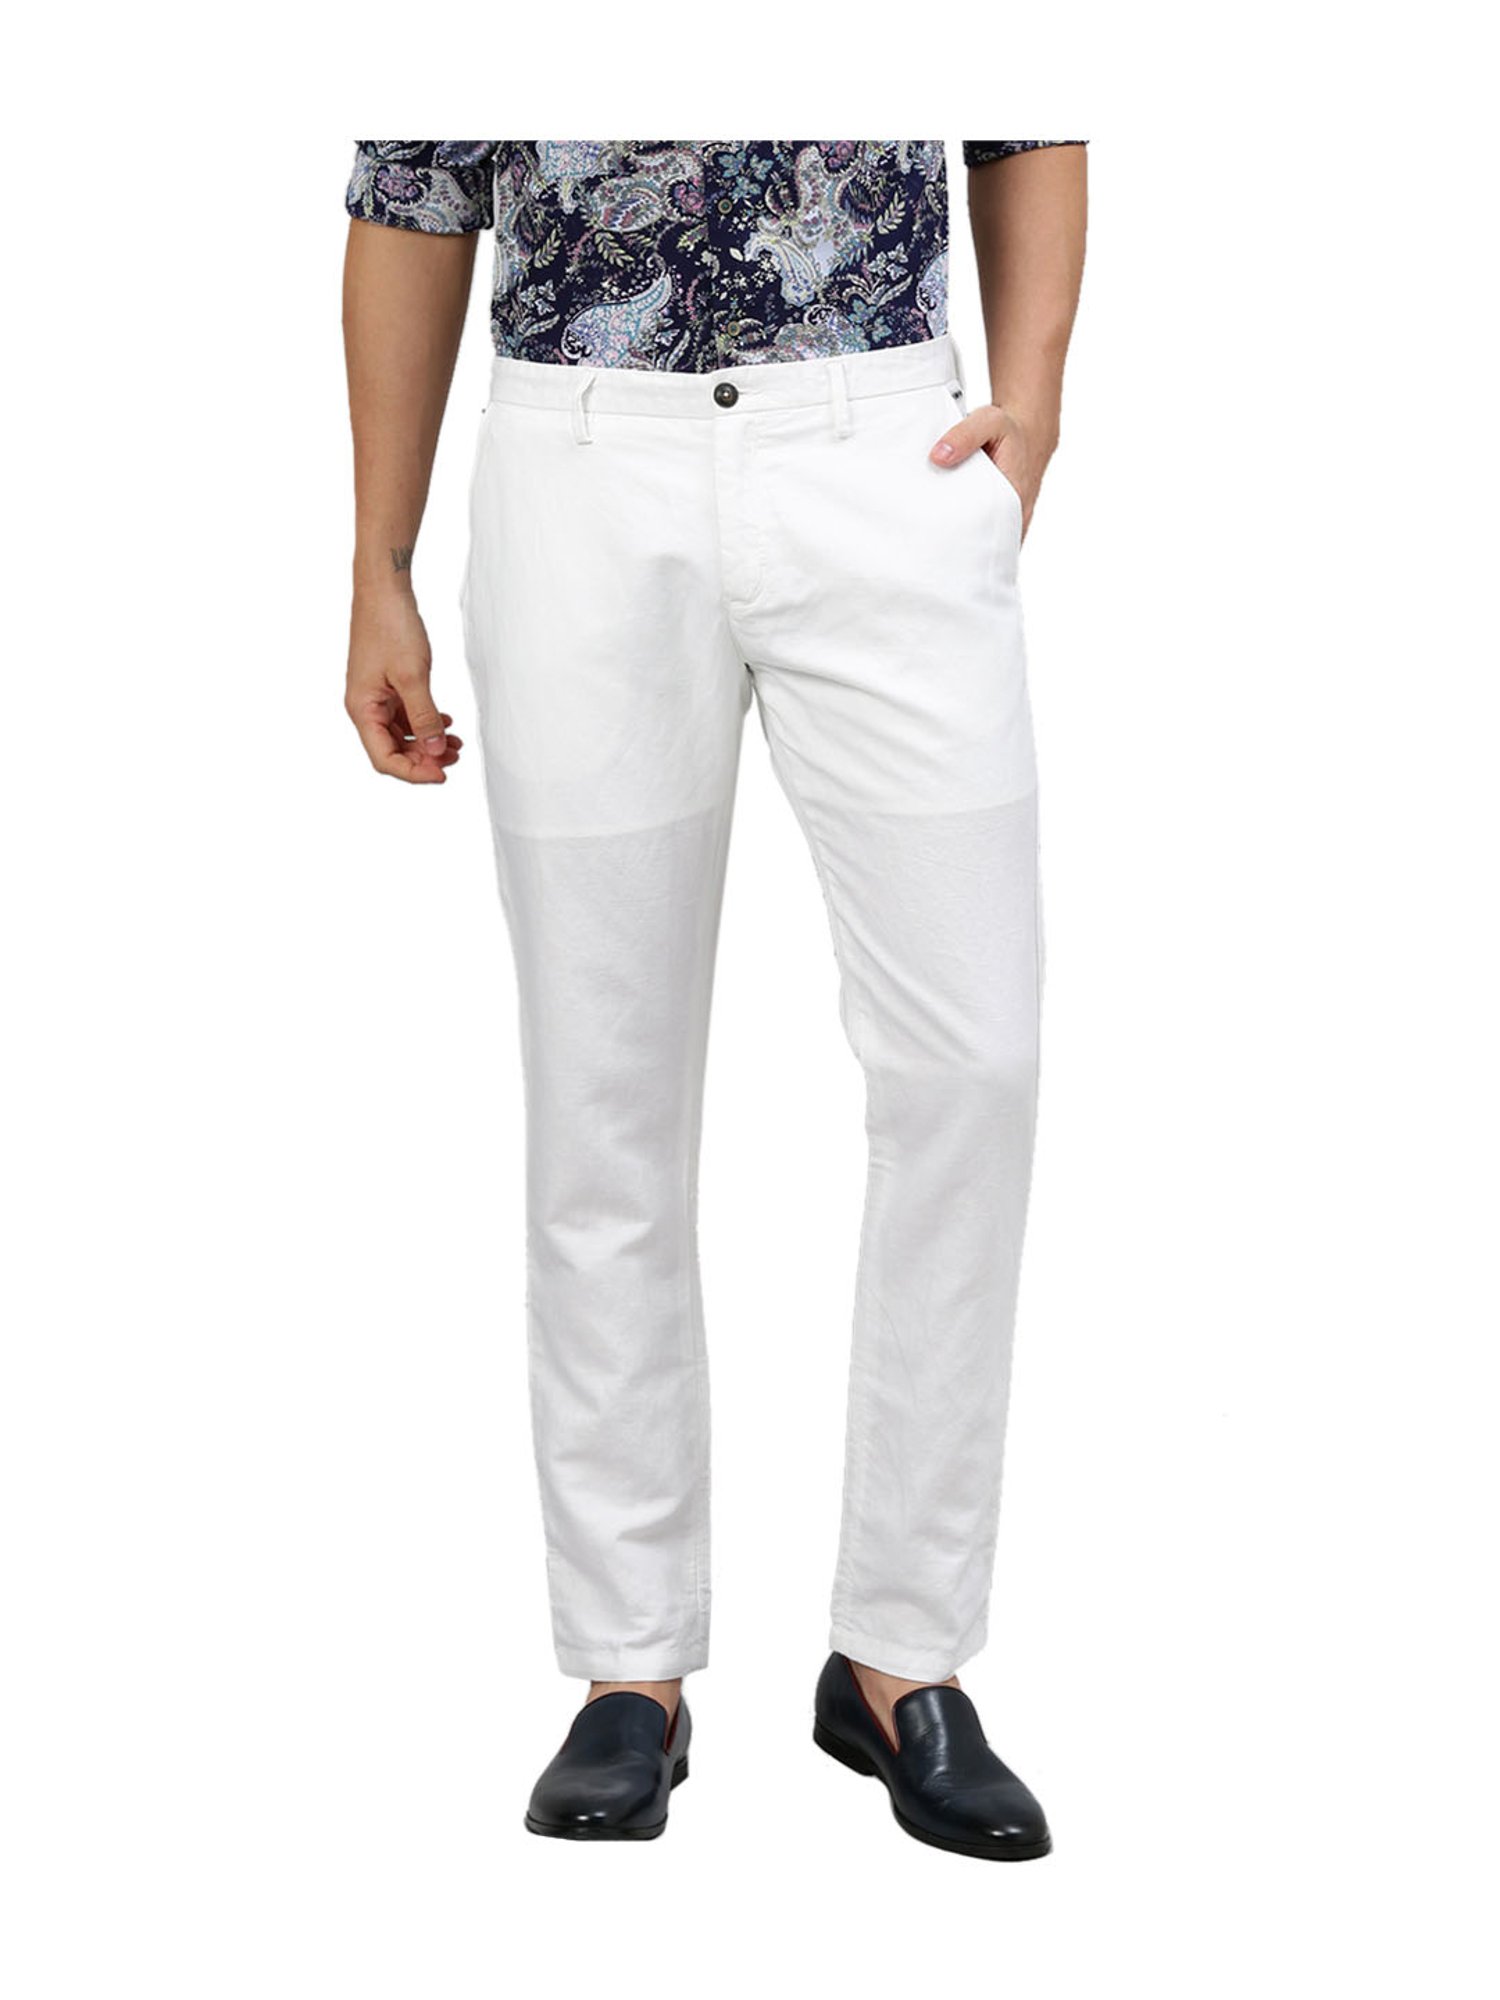 Buy Yellow Trousers  Pants for Men by LEVIS Online  Ajiocom